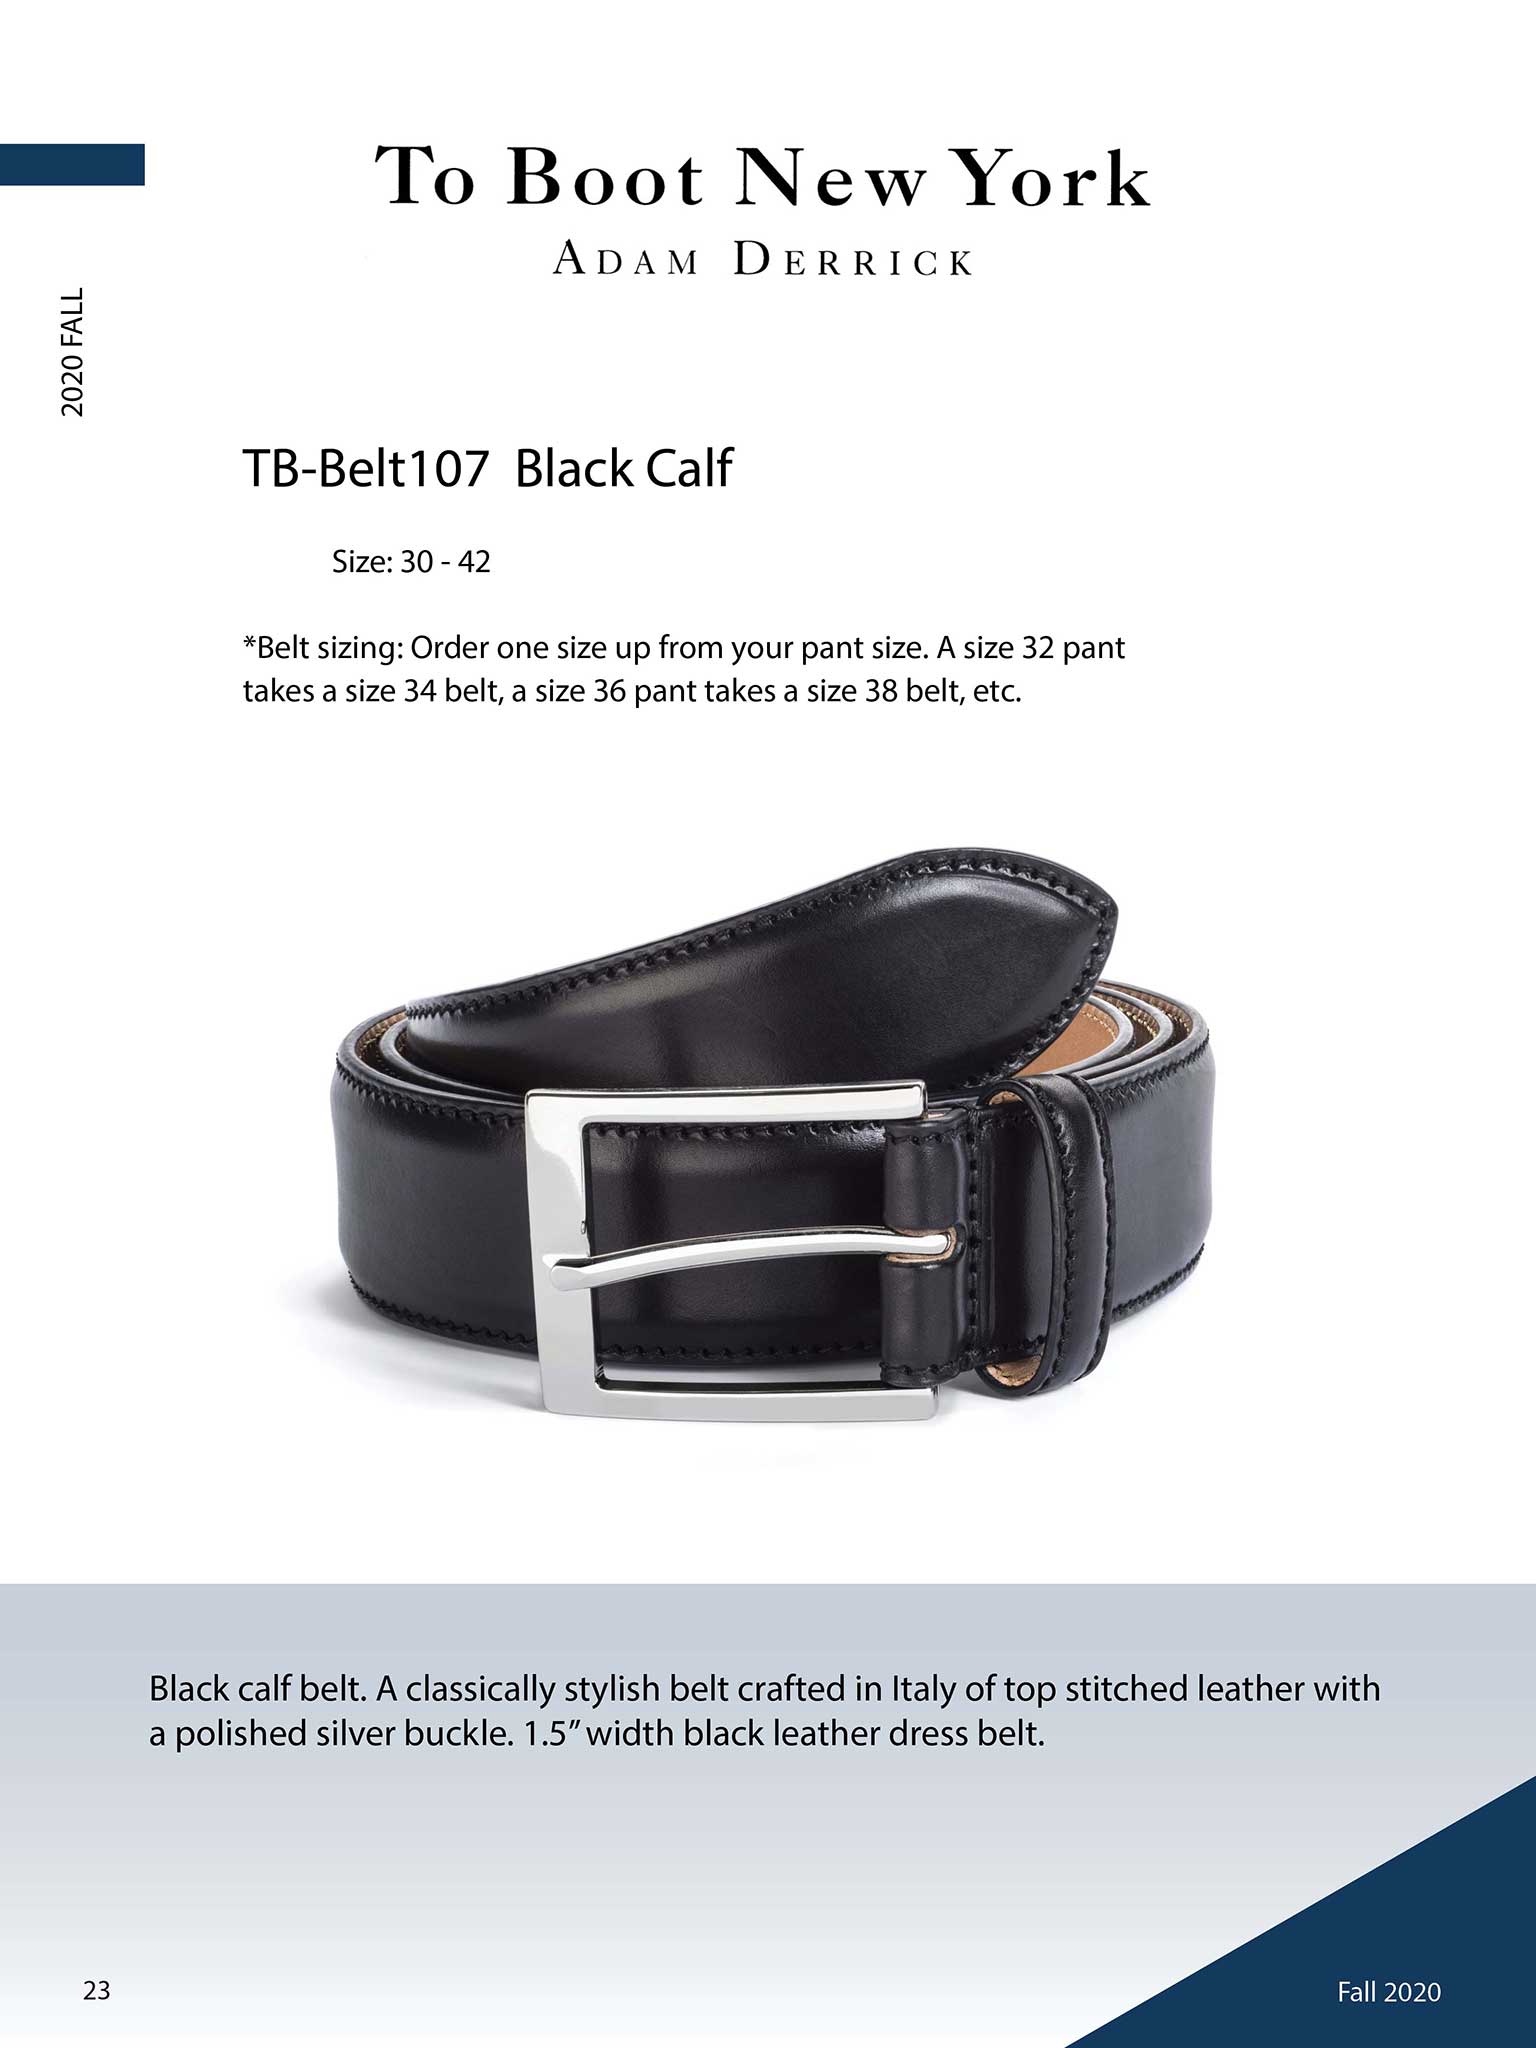 To Boot New York                                                                                                                                                                                                                                          , Black Calf Belt by To Boot New York